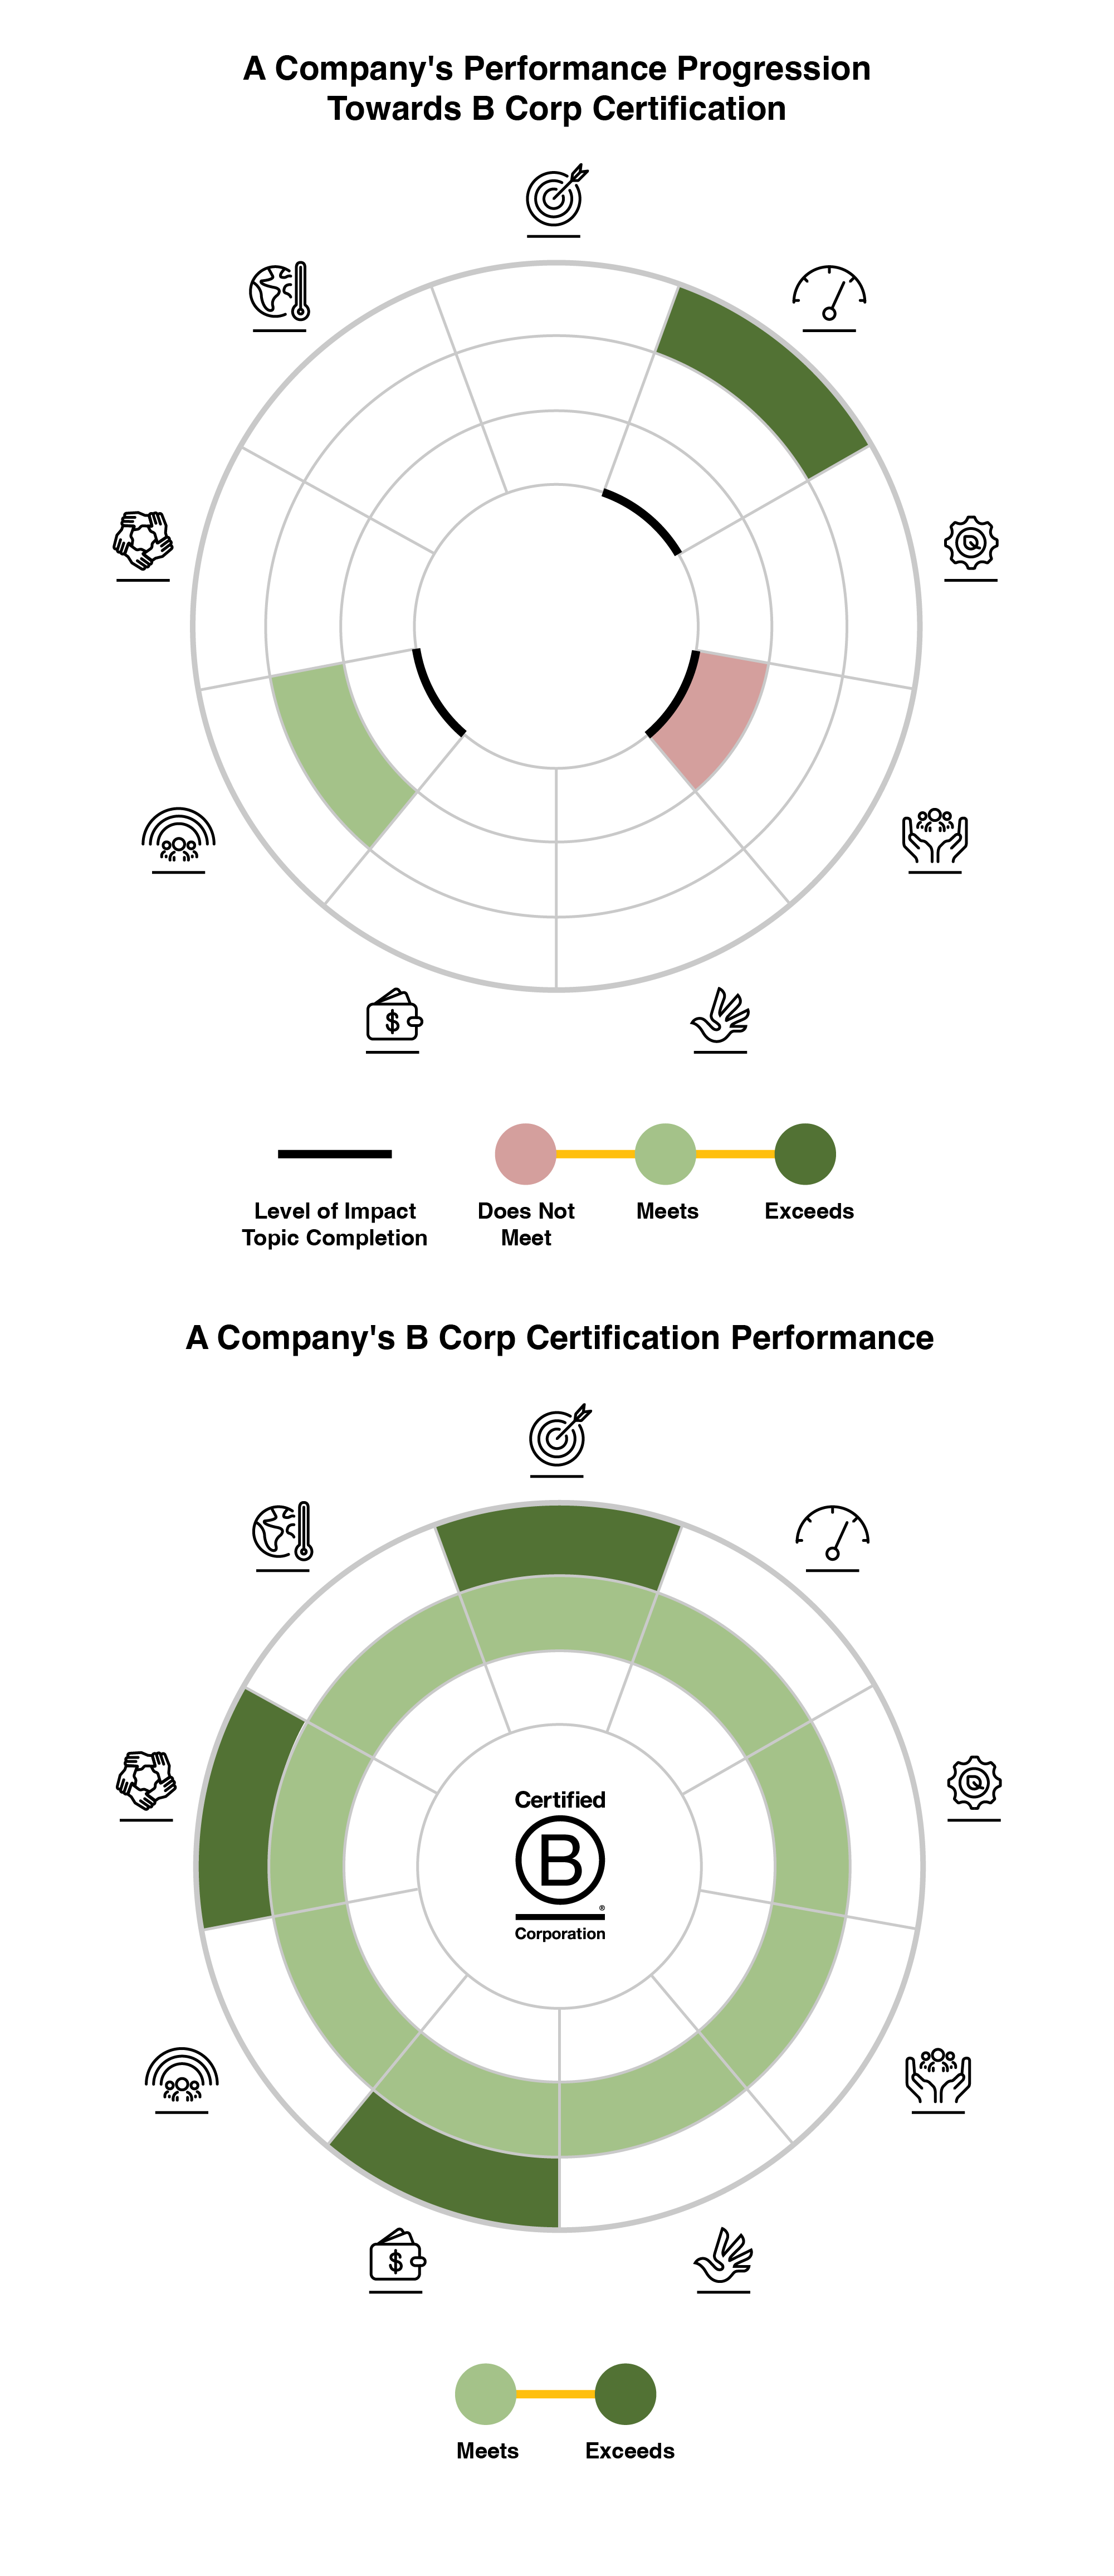 First visualization of a company’s progress towards completing impact topics for submission for certification. Second visualization showing a company’s verified performance at the impact topic level across all the topics on their B Corp Public Profile.